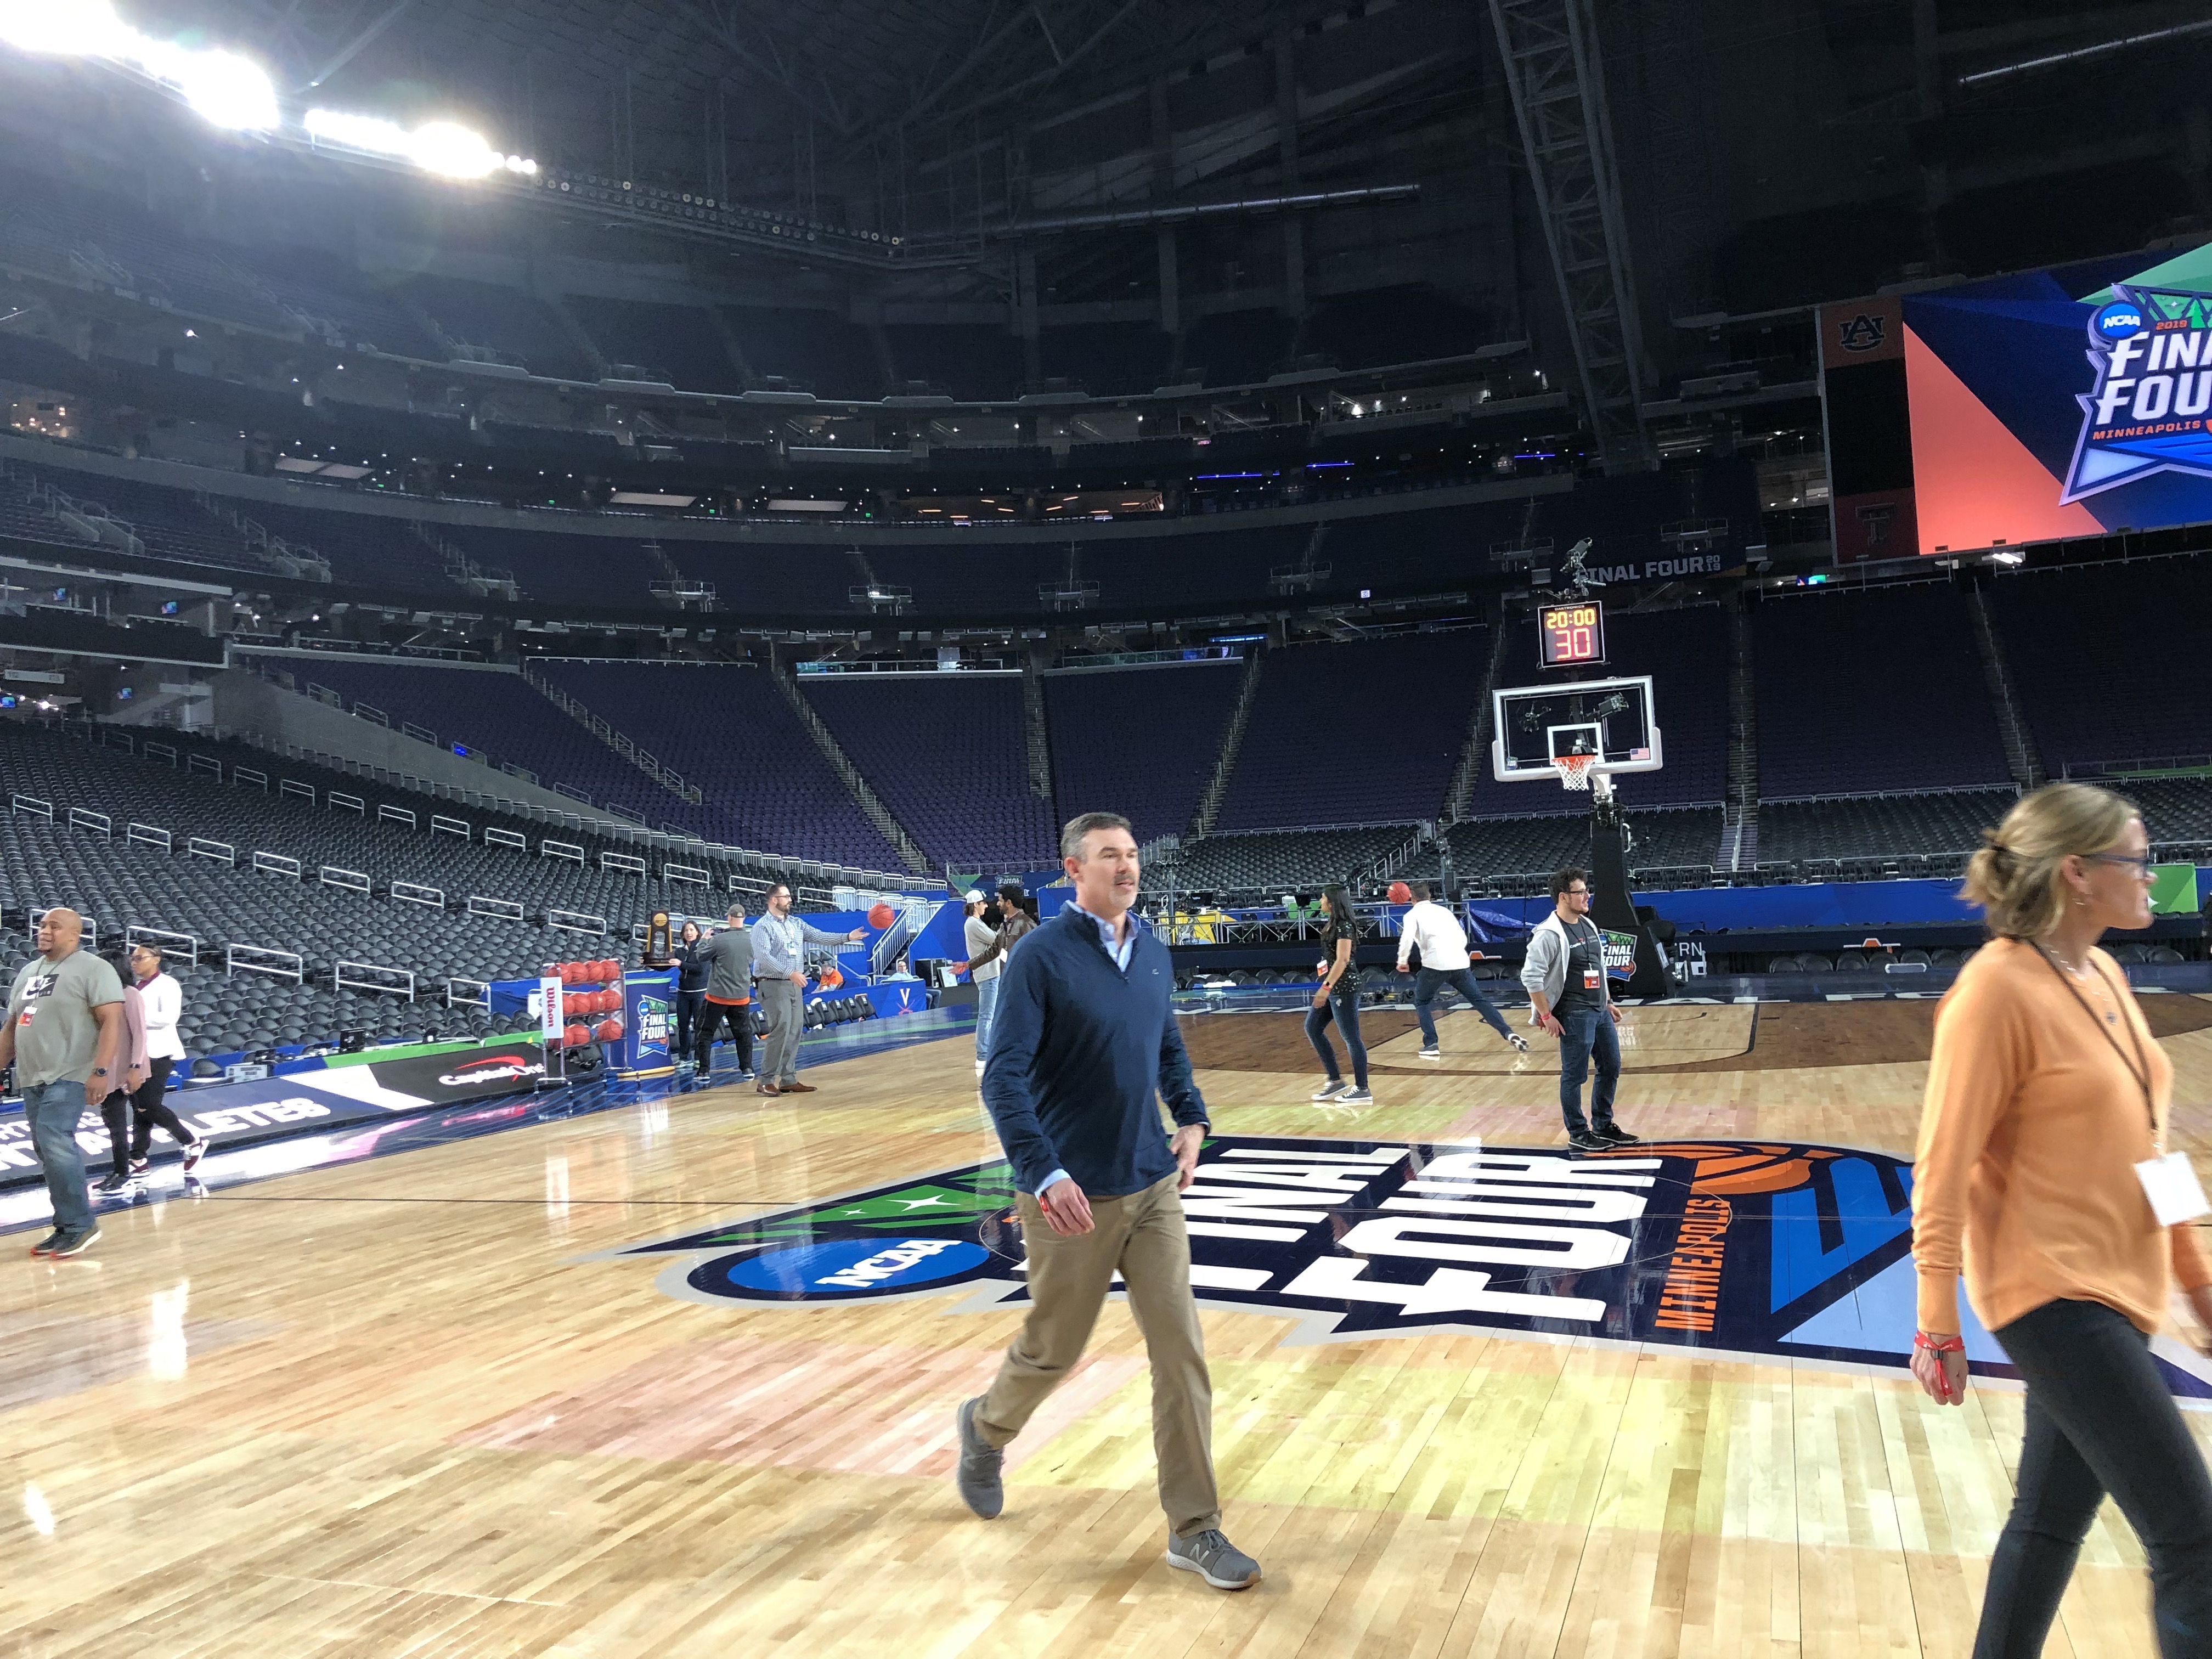 Peple on the basketball court the night before the Final Four games. Empty stadium otherwise.